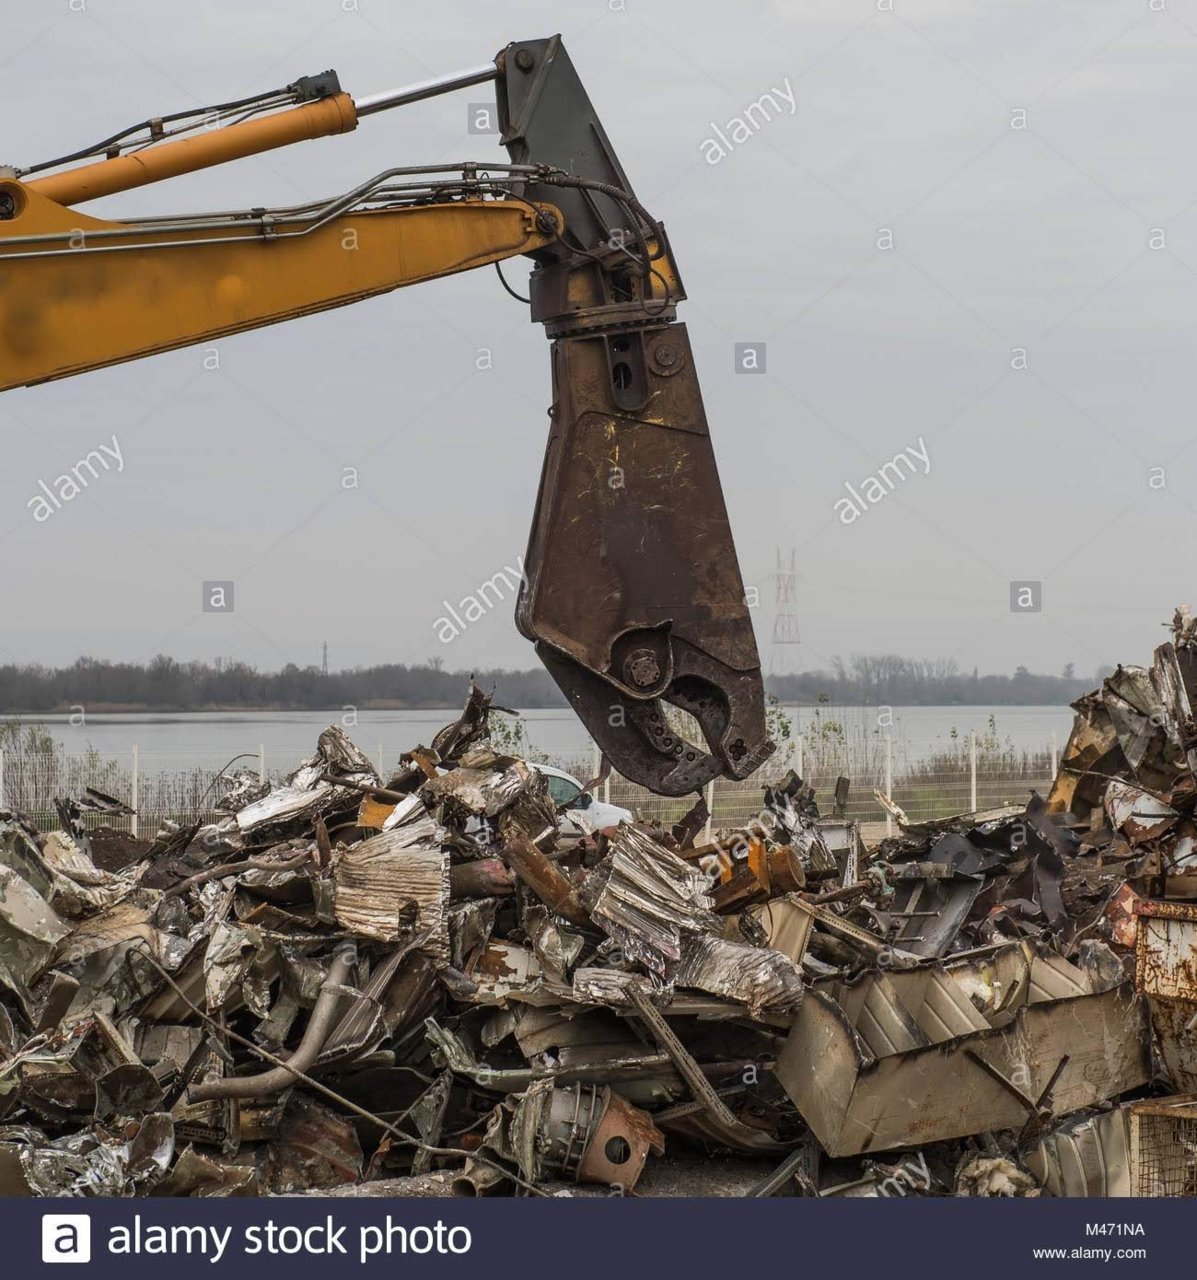 large-tracked-excavator-working-a-steel-pile-at-a-metal-recycle-yard-M471NA.jpg